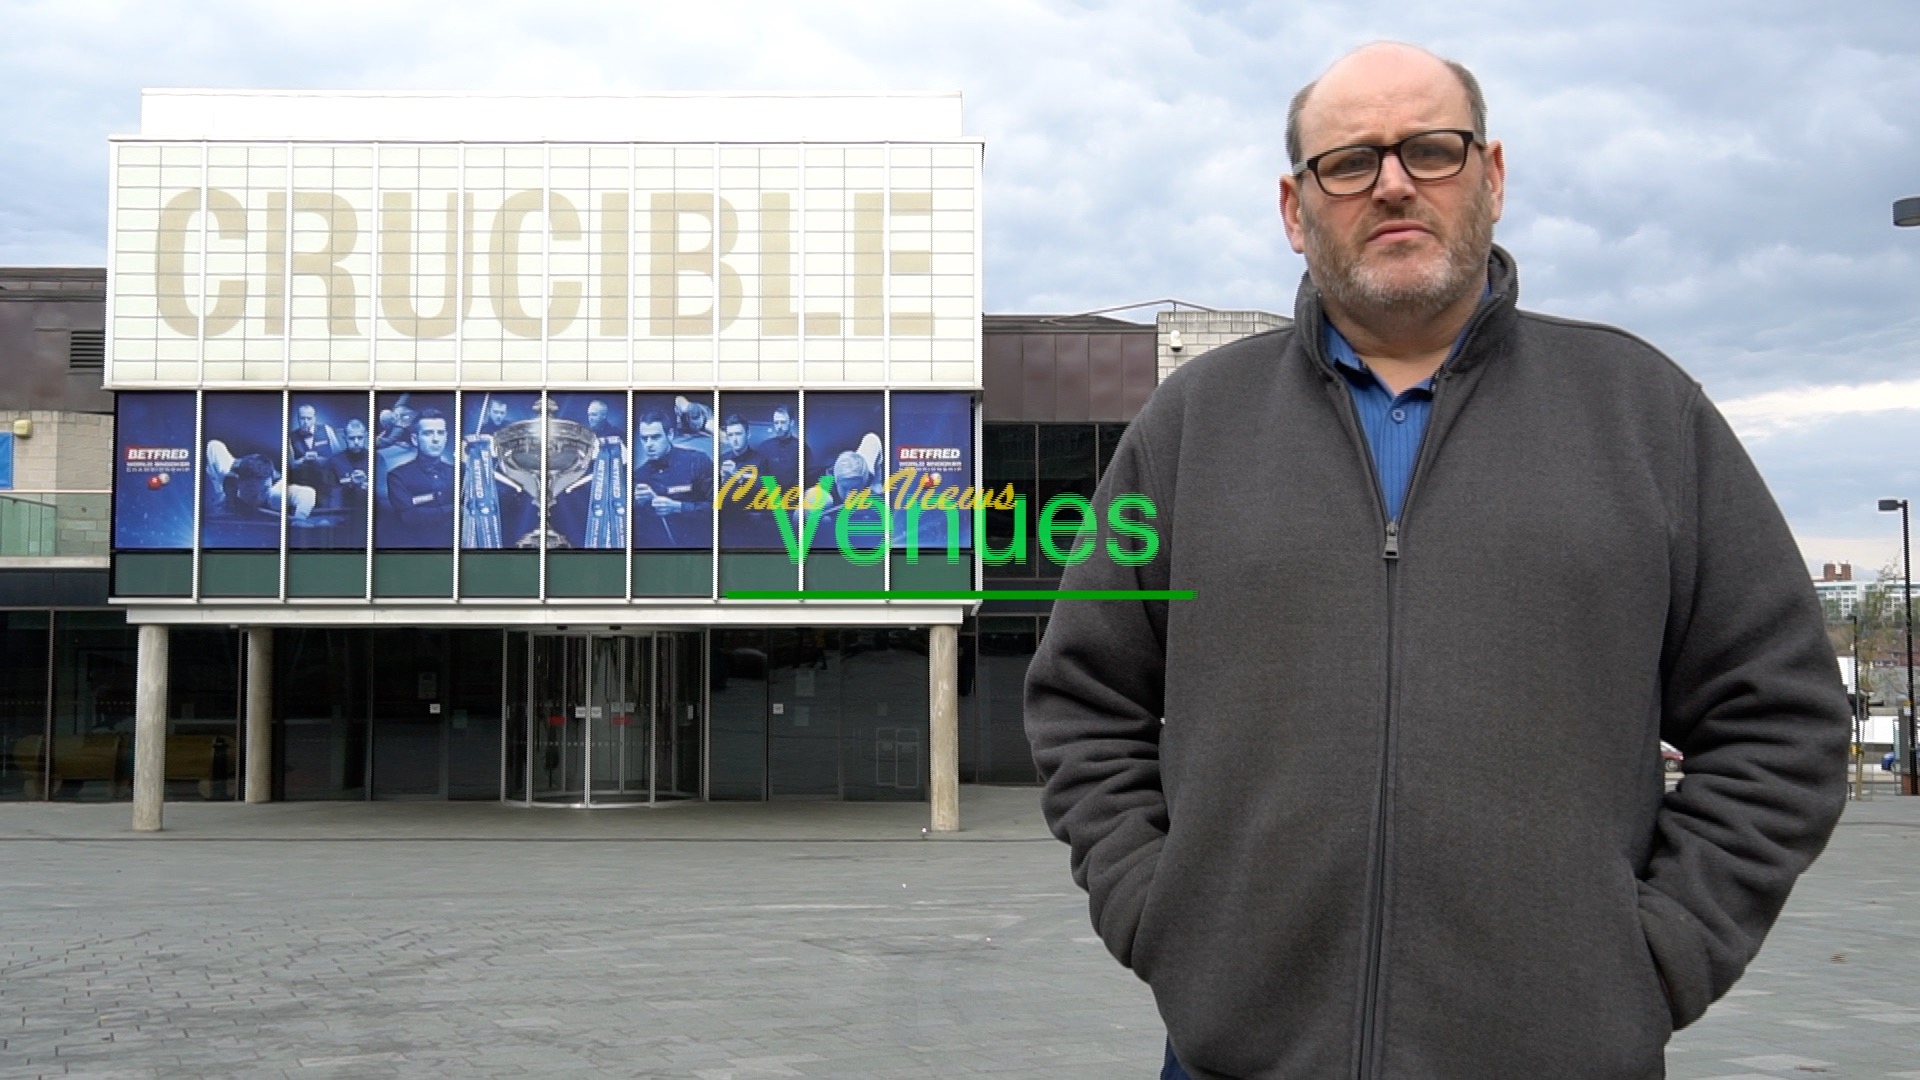 Sheffield: Institute of Sport and Crucible Theatre